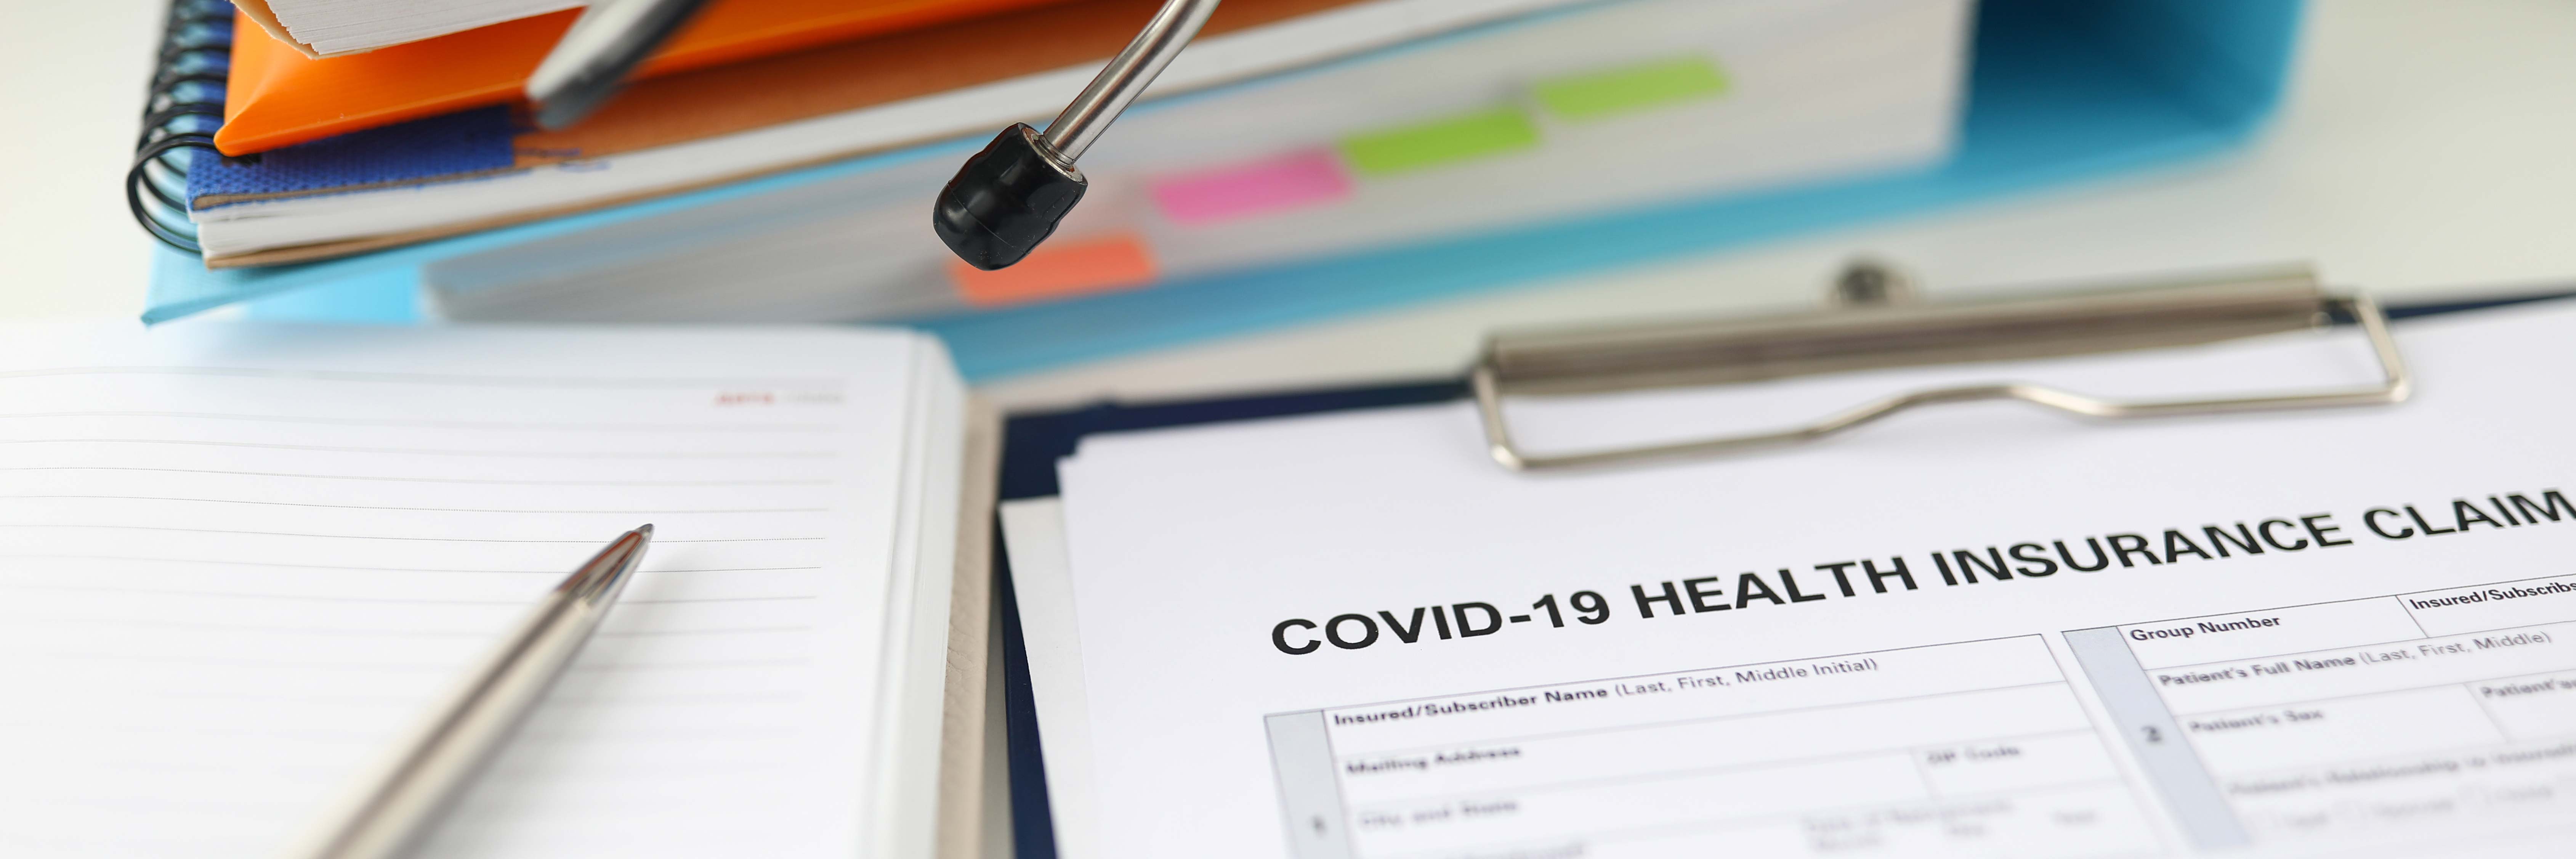 Why to Buy Covid-19 Insurance?